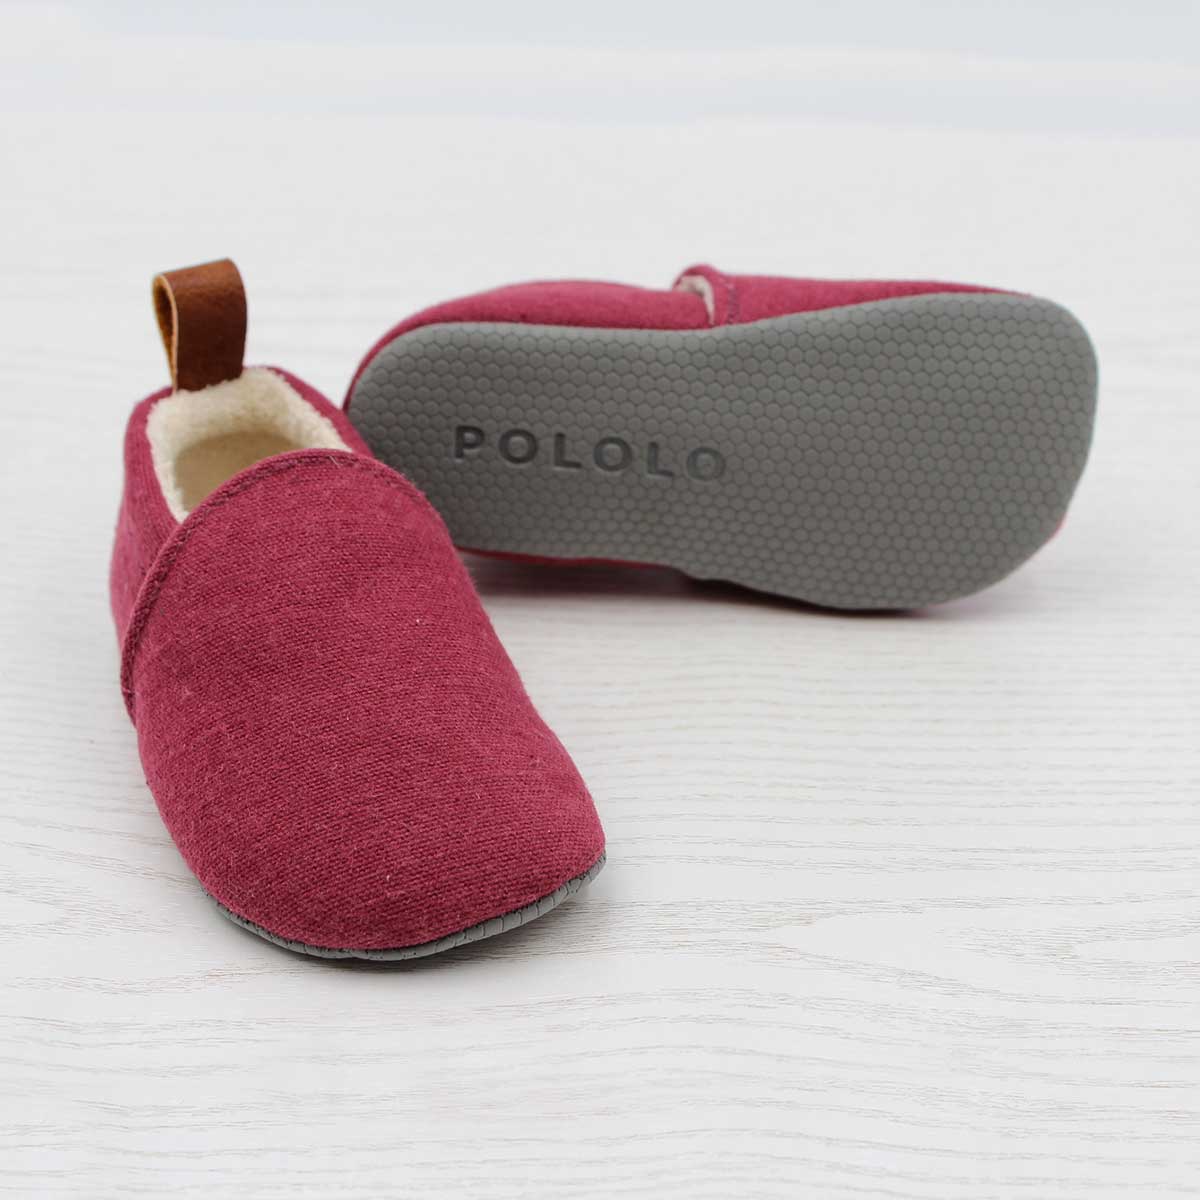 POLOLO slippers cotton wine red sole